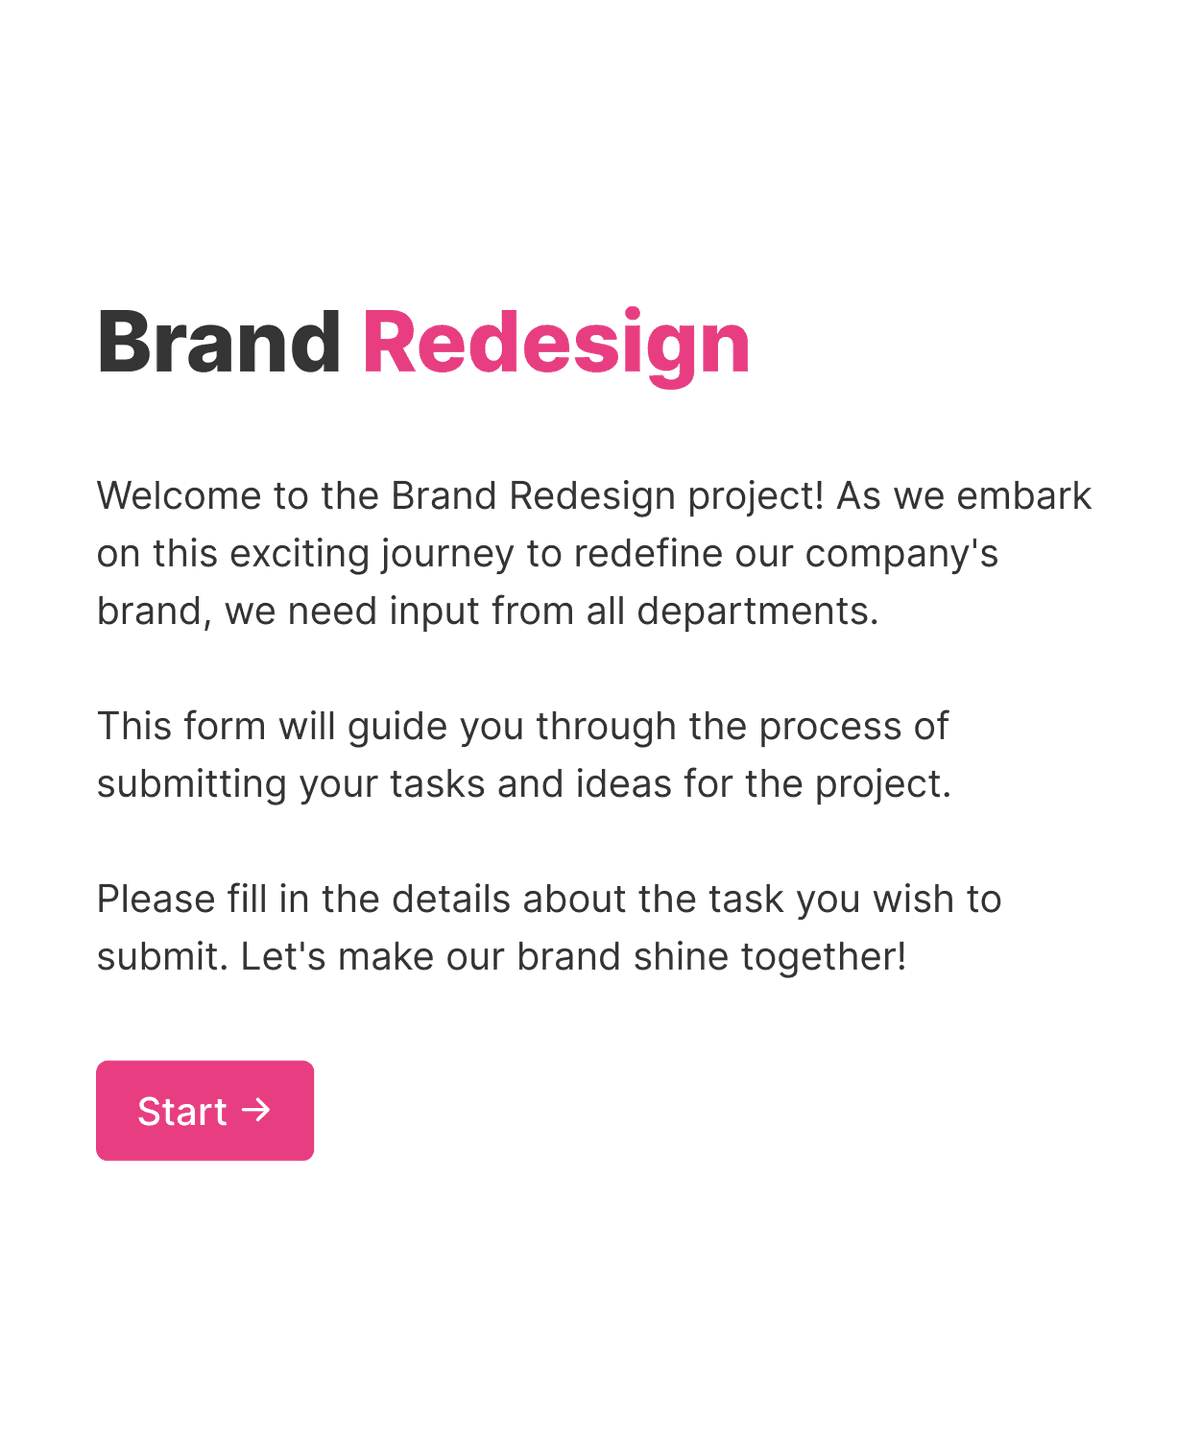 Welcome step of 'Brand redesign project' with introduction text, and a 'Start' button